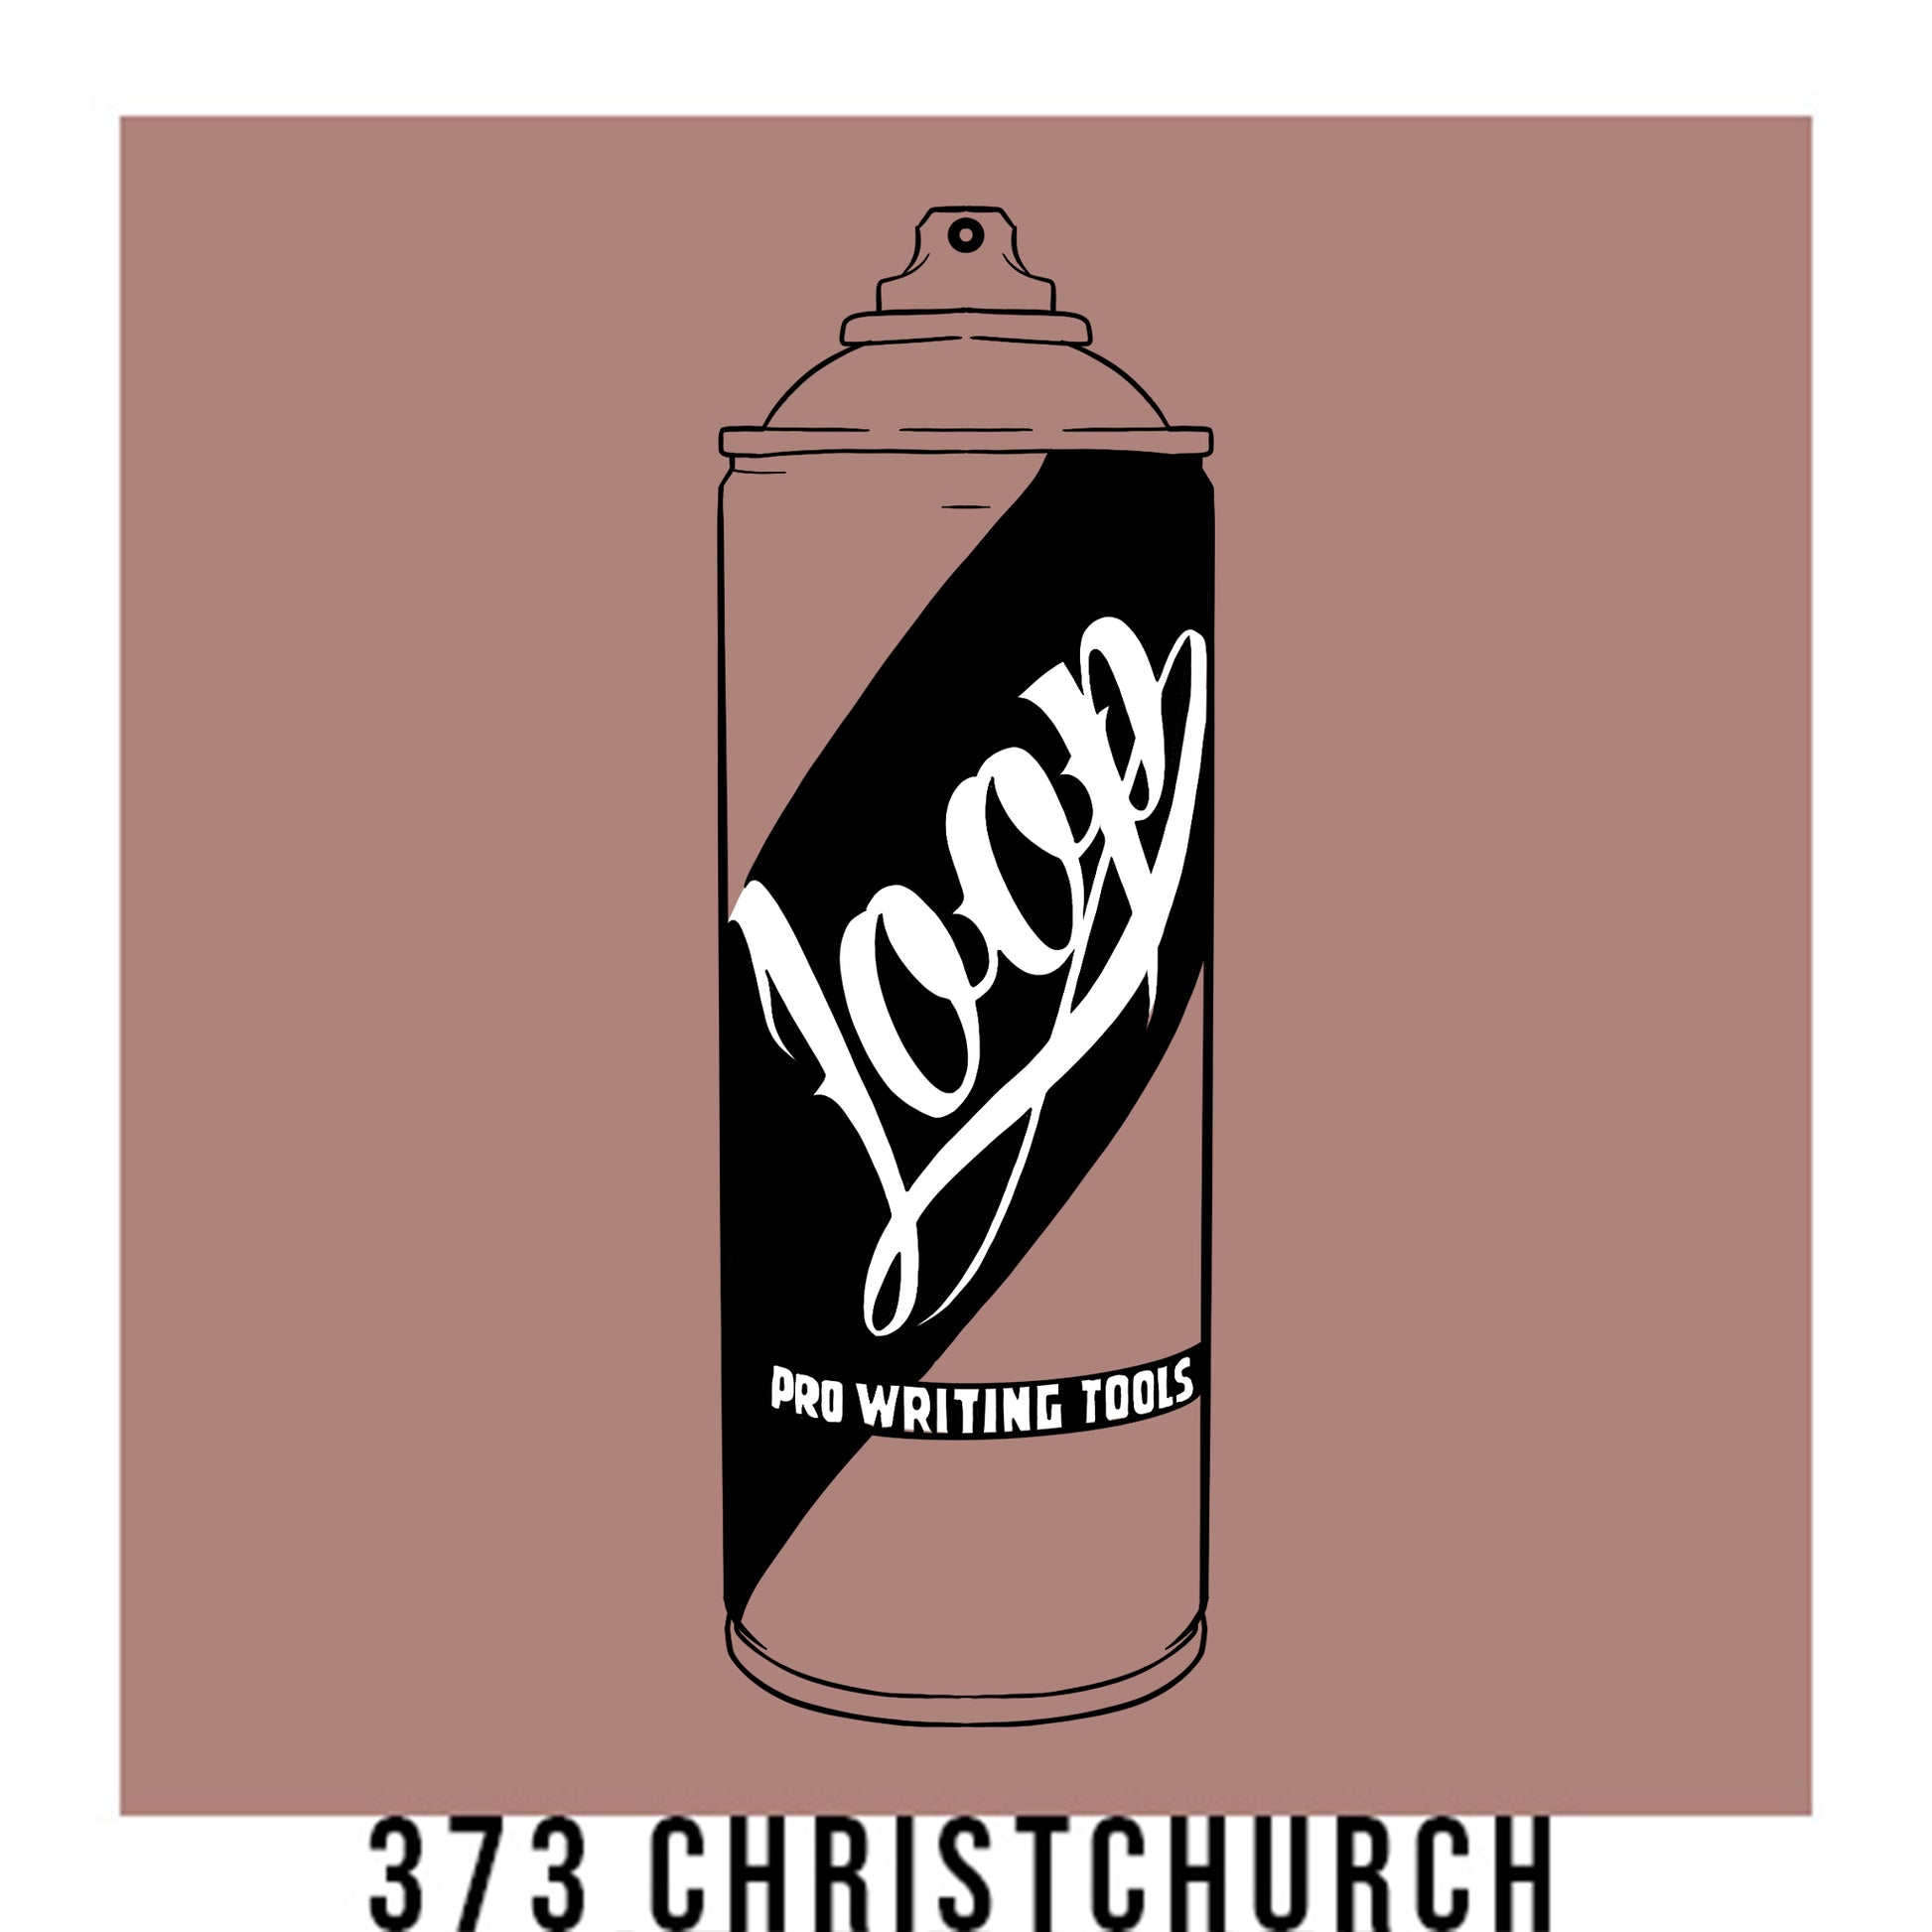 A black outline drawing of a dark muted pink spray paint can with the word "Loop" written on the face in script. The background is a color swatch of the same dark muted pink with a white border with the words "373 Christchurch" at the bottom.